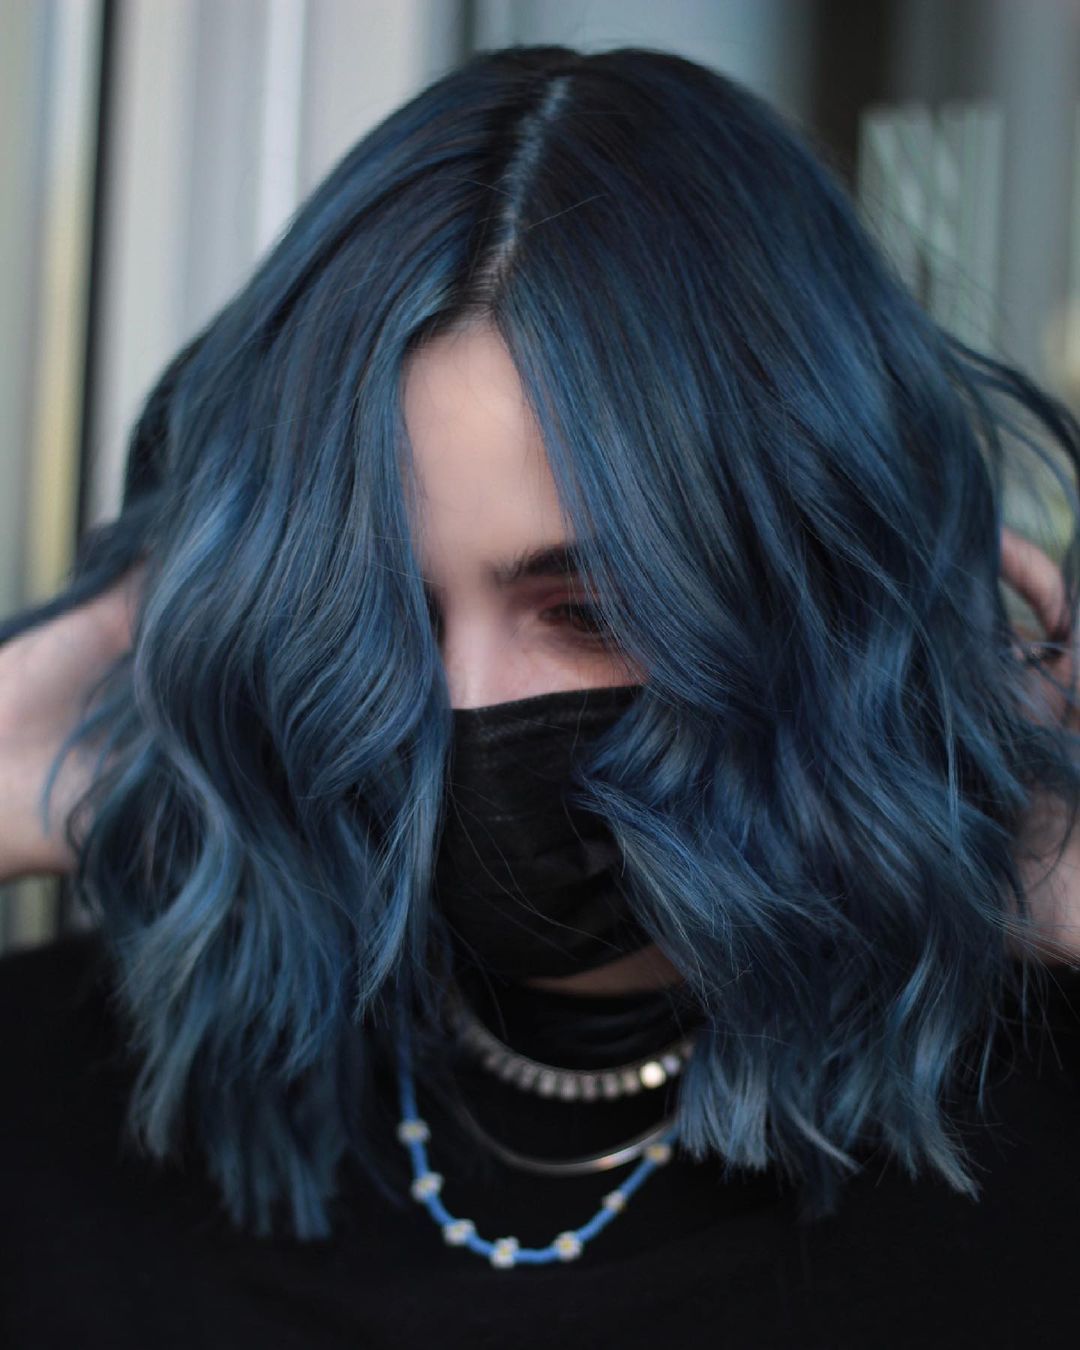 Amazing Hair Colors And Hair Color Trends For 2021 images 2